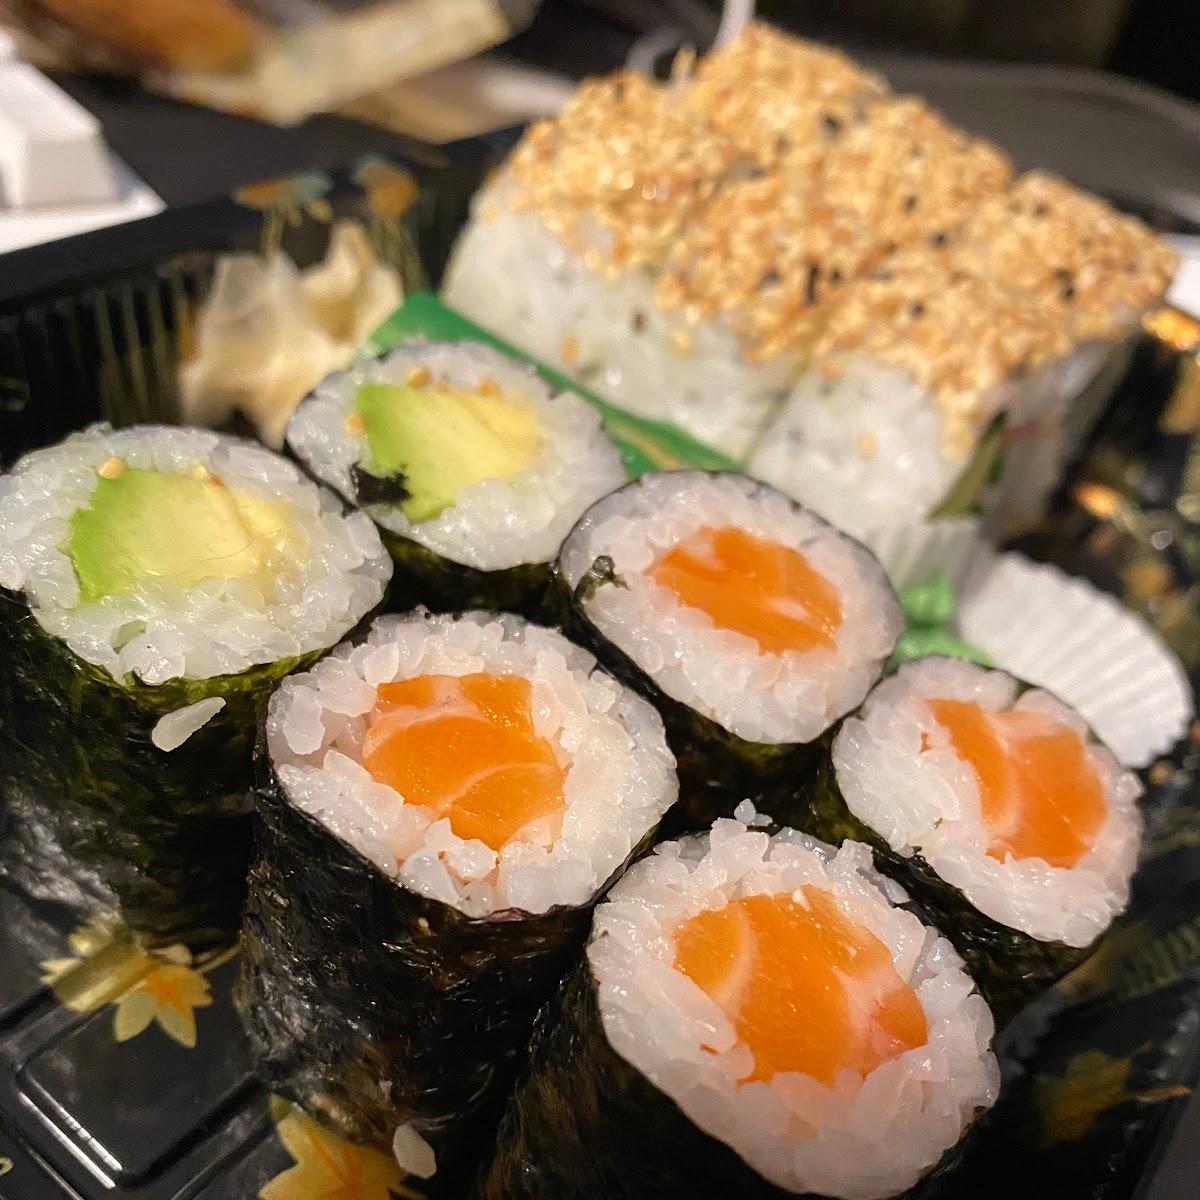 Restaurant "SUSHI & FUSION" in Gröbenzell